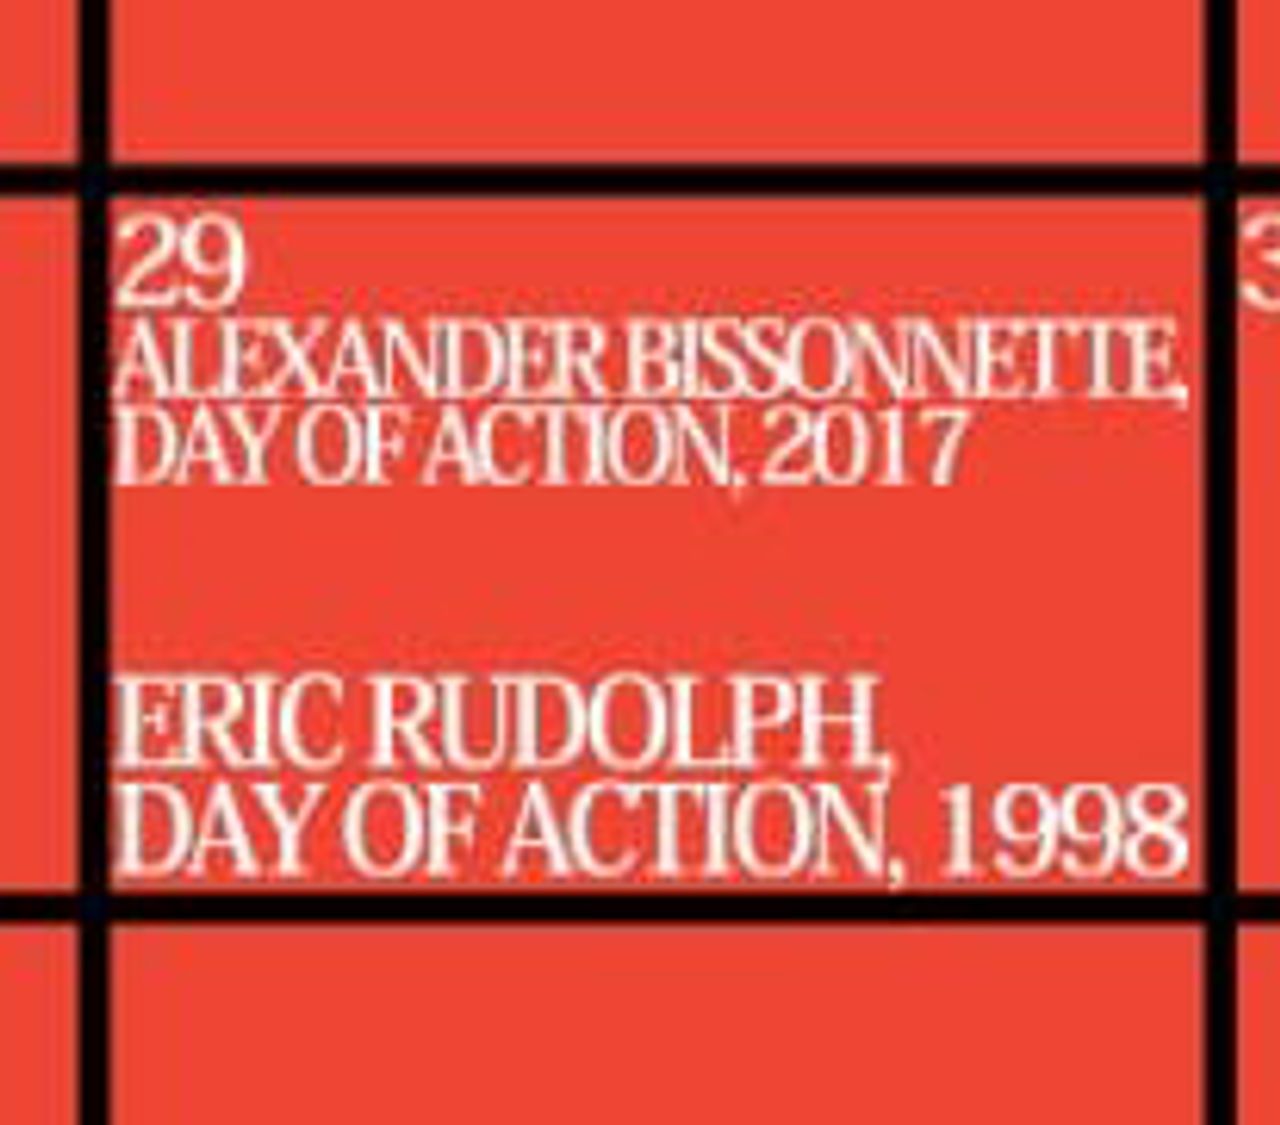 Calendar date listing two "Days of Action", Alexander Brisonnette, and Eric Rudolph.